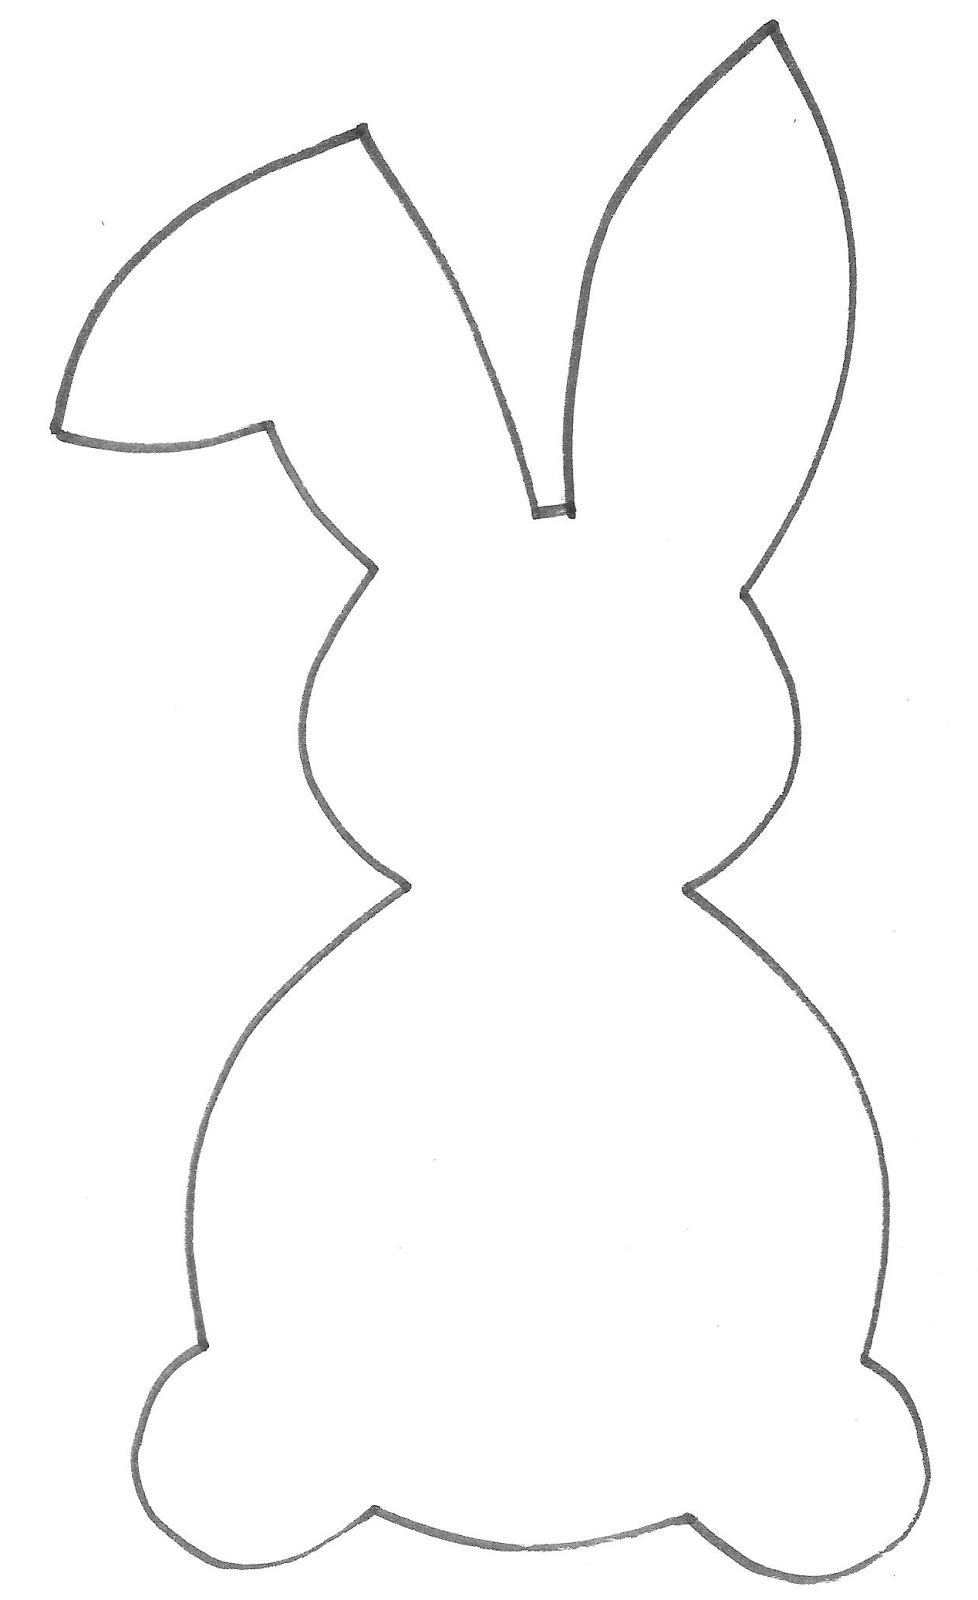 bunny rabbit printables 60 rabbit shape templates and crafts colouring pages rabbit printables bunny 